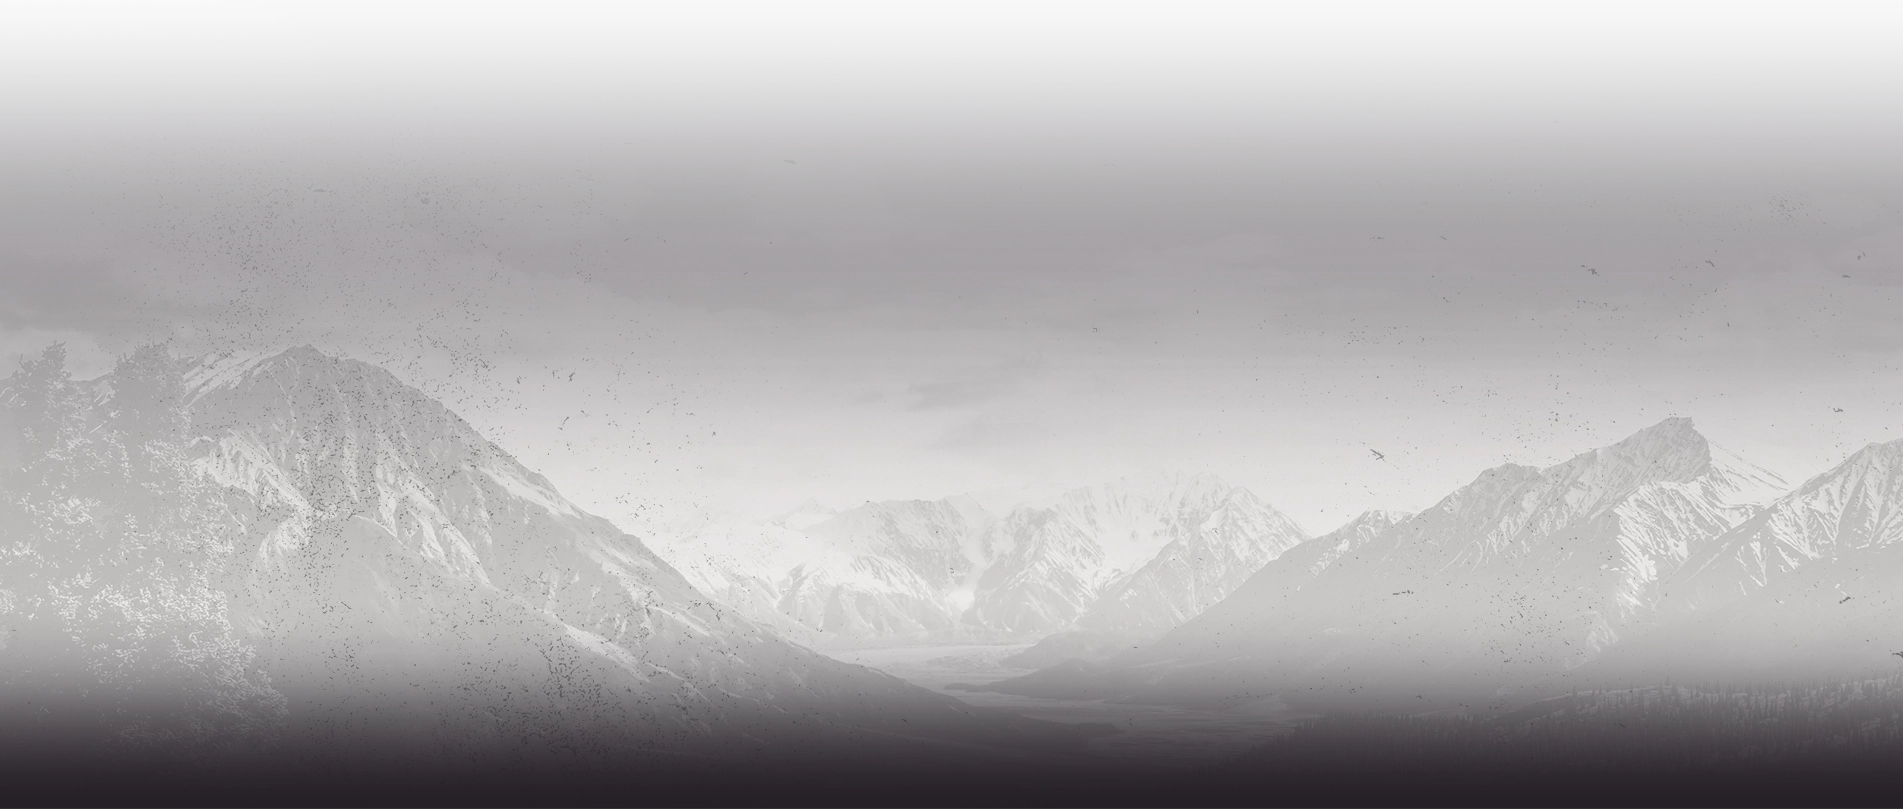 Snow capped mountains with overlays of distressed white and purple colors